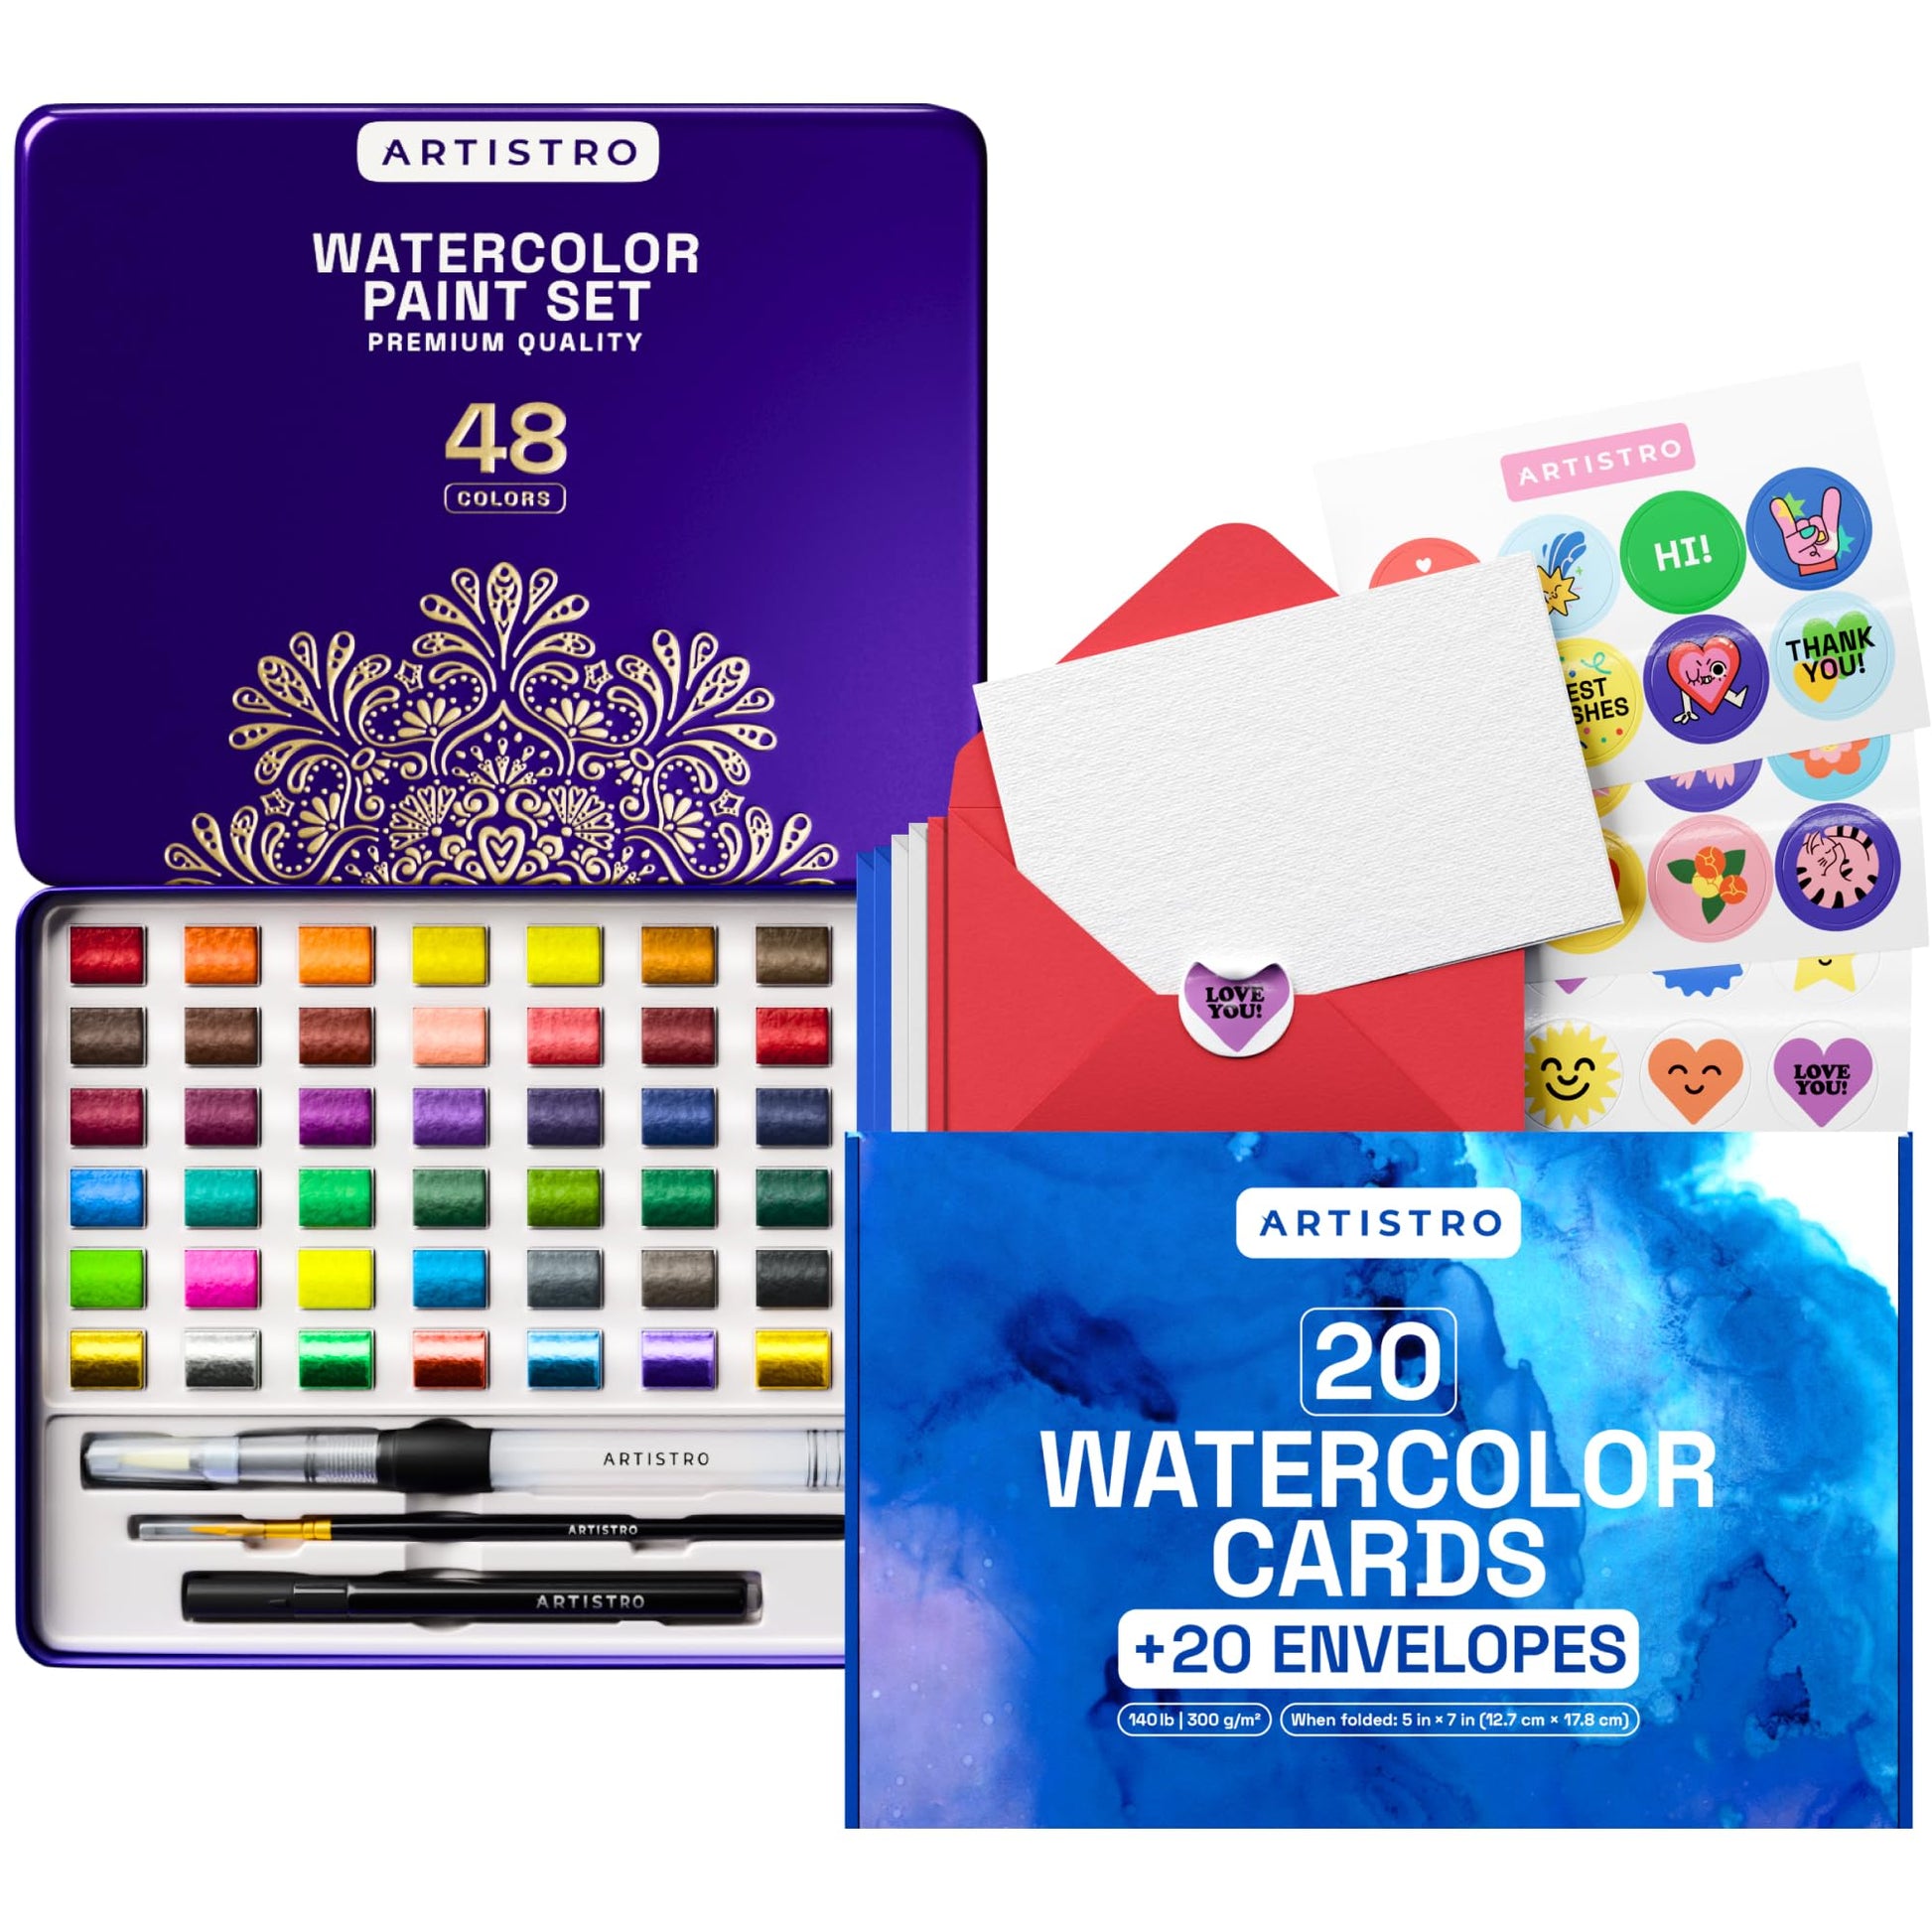 ARTISTRO Watercolor Paint Set, 48 Vivid Colors in Portable Box, Including Metallic and Fluorescent Colors for Artists, Amateur Hobbyists and Painting